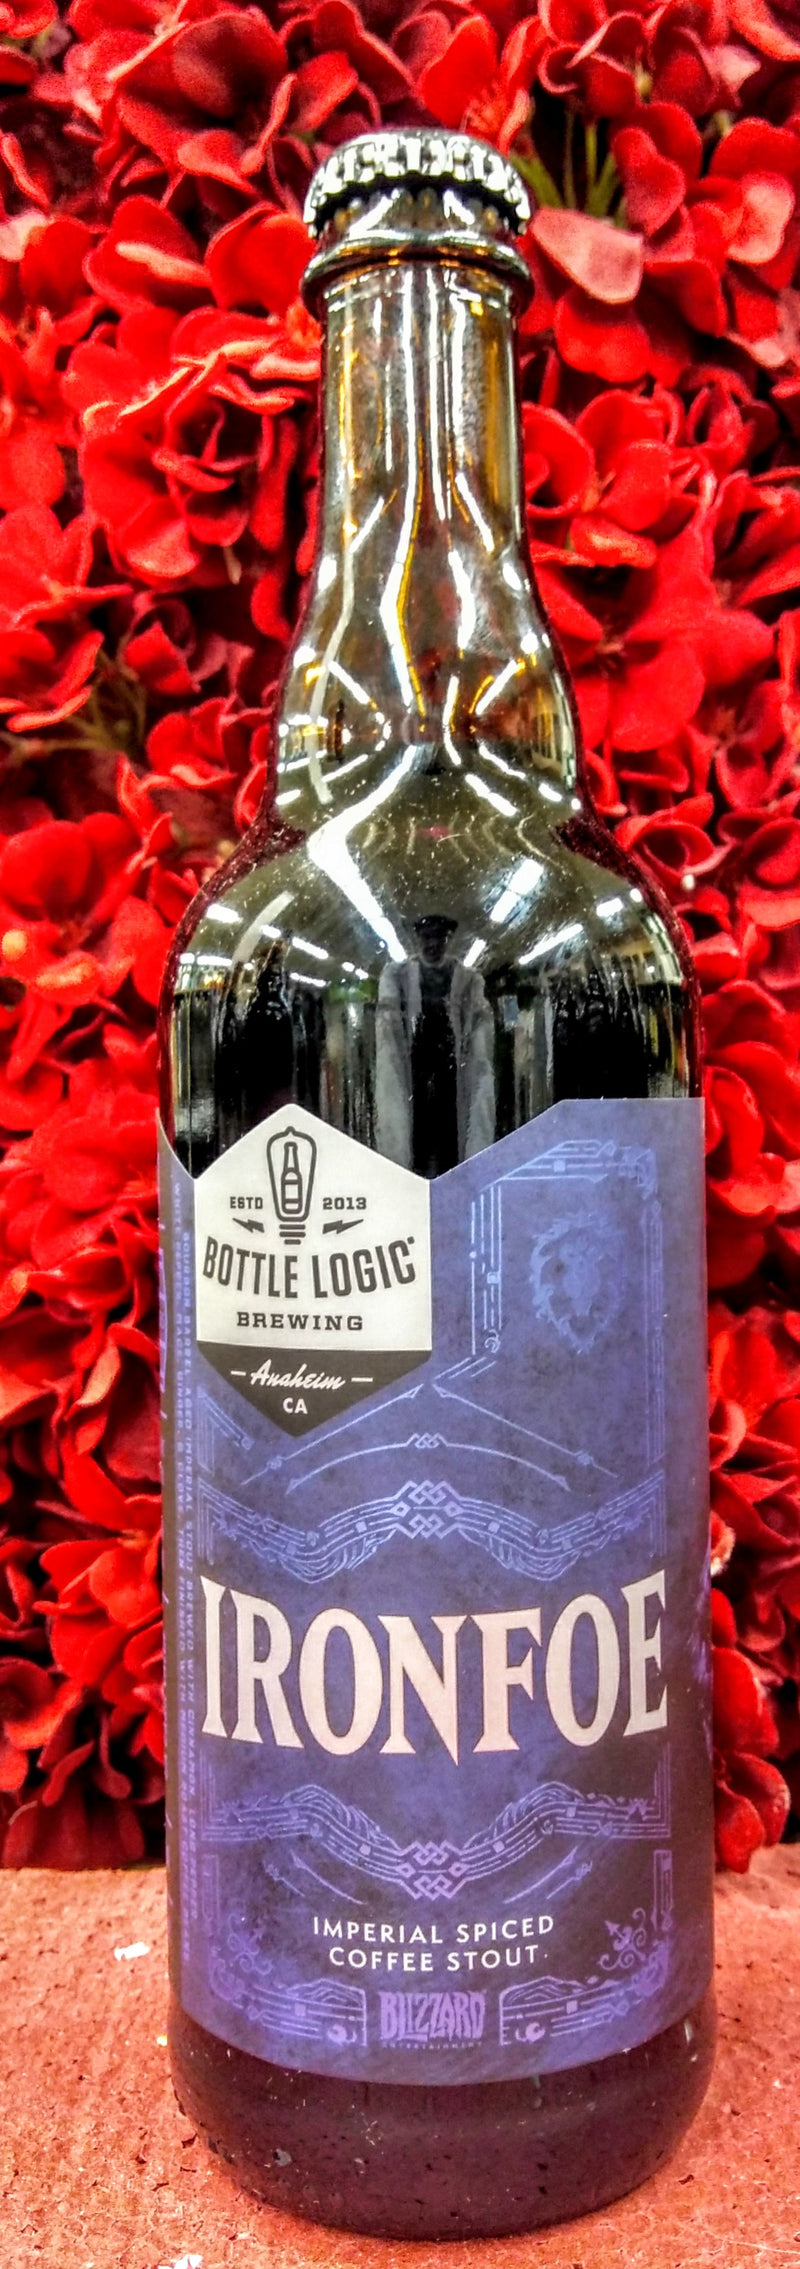 BOTTLE LOGIC BREWING 2019 IRONFOE IMPERIAL SPICED COFFEE STOUT 500ml